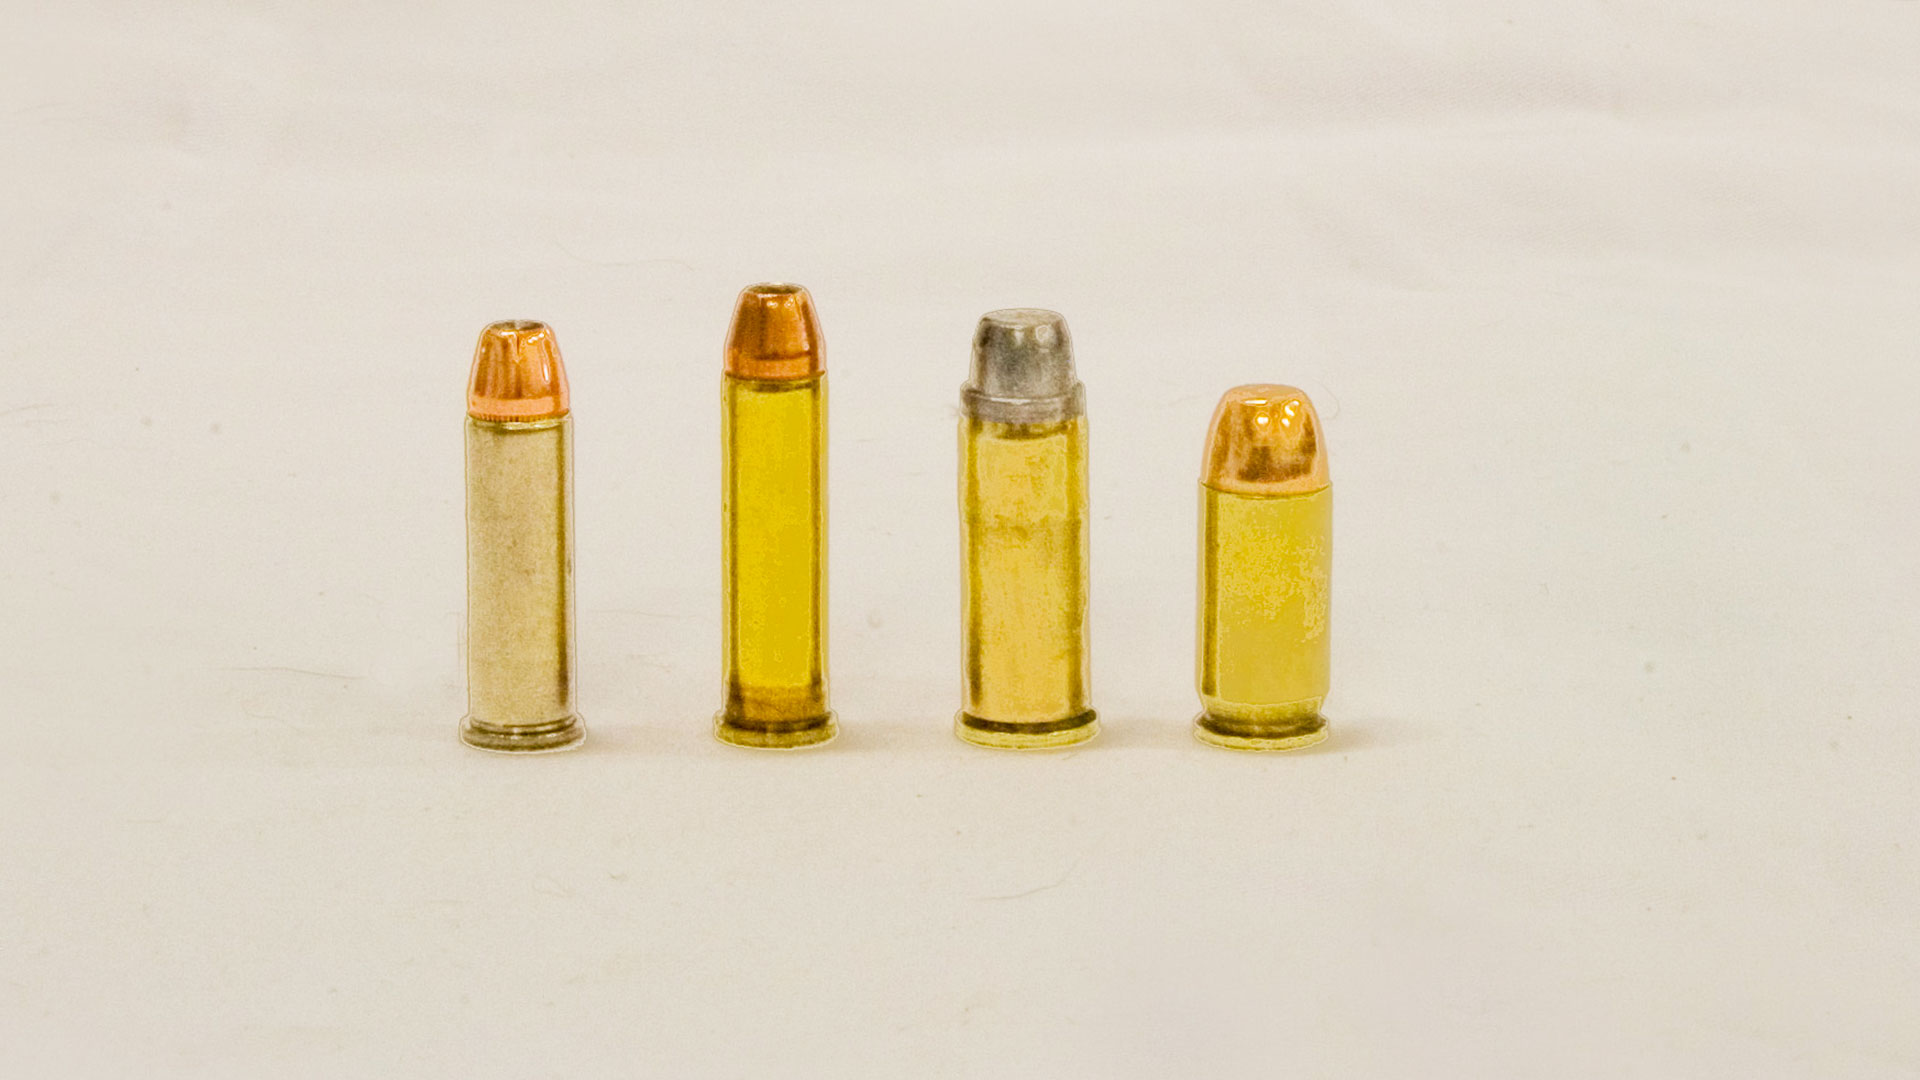 A size comparison between, from left to right, .38 Spl., .357 Mag., .44 Spl. and .45 ACP.